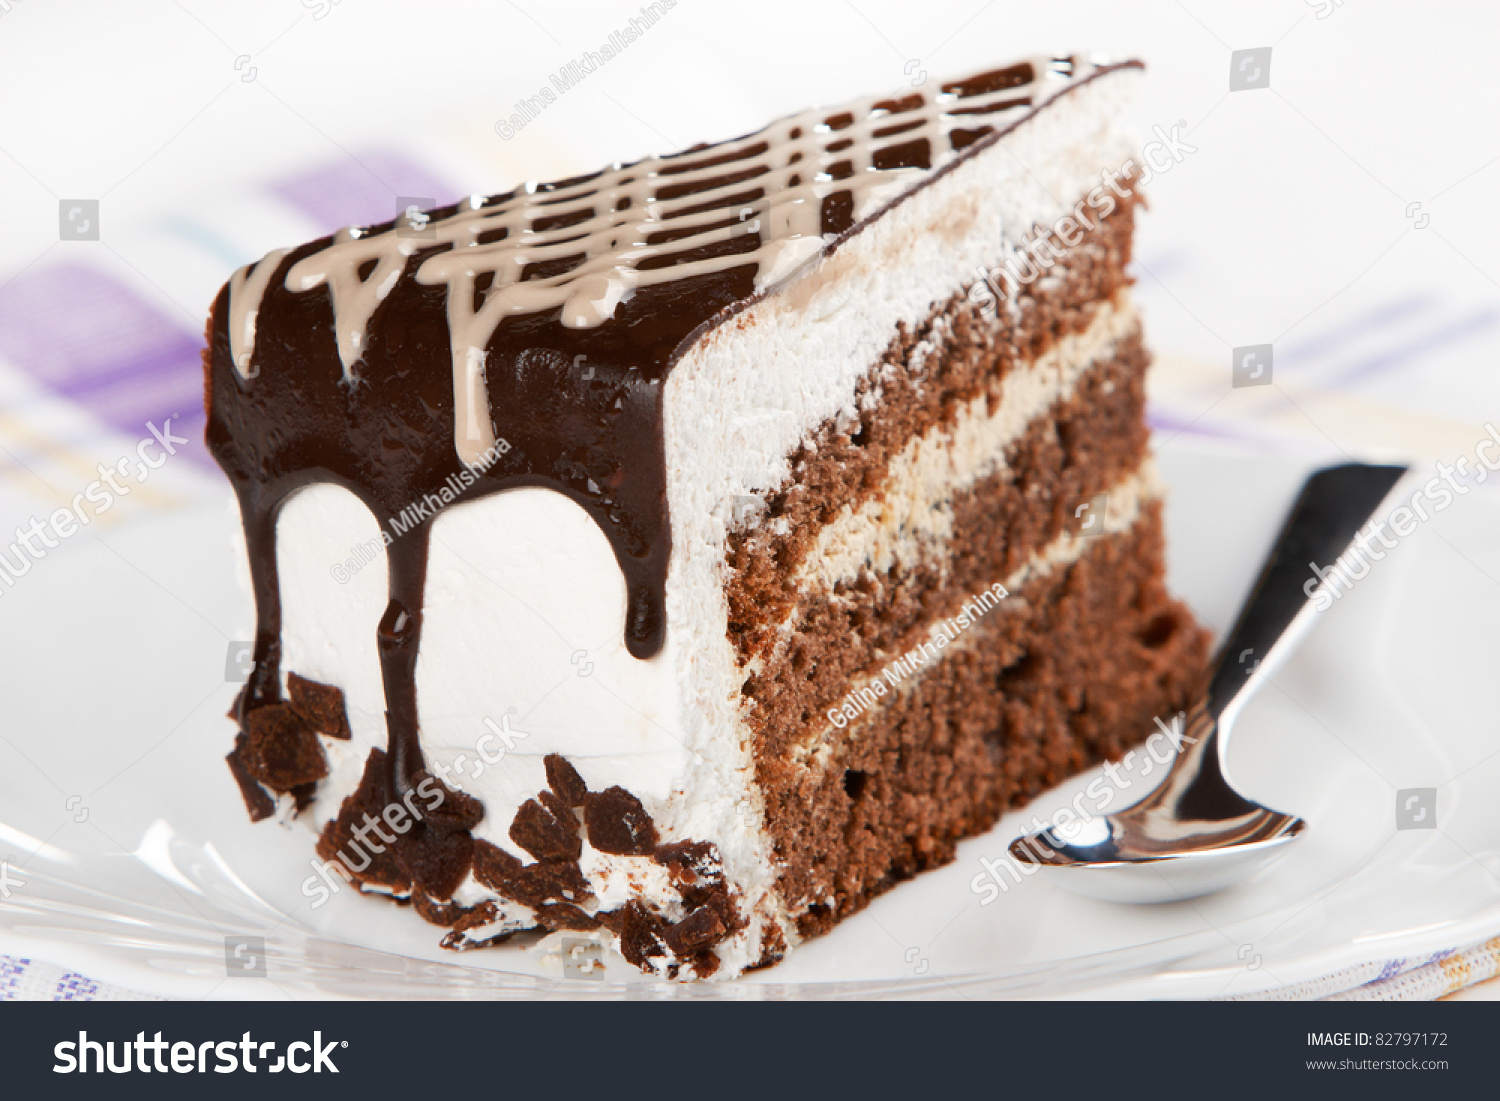 A Piece Of Cake On White Plate Stock Photo 82797172 : Shutterstock